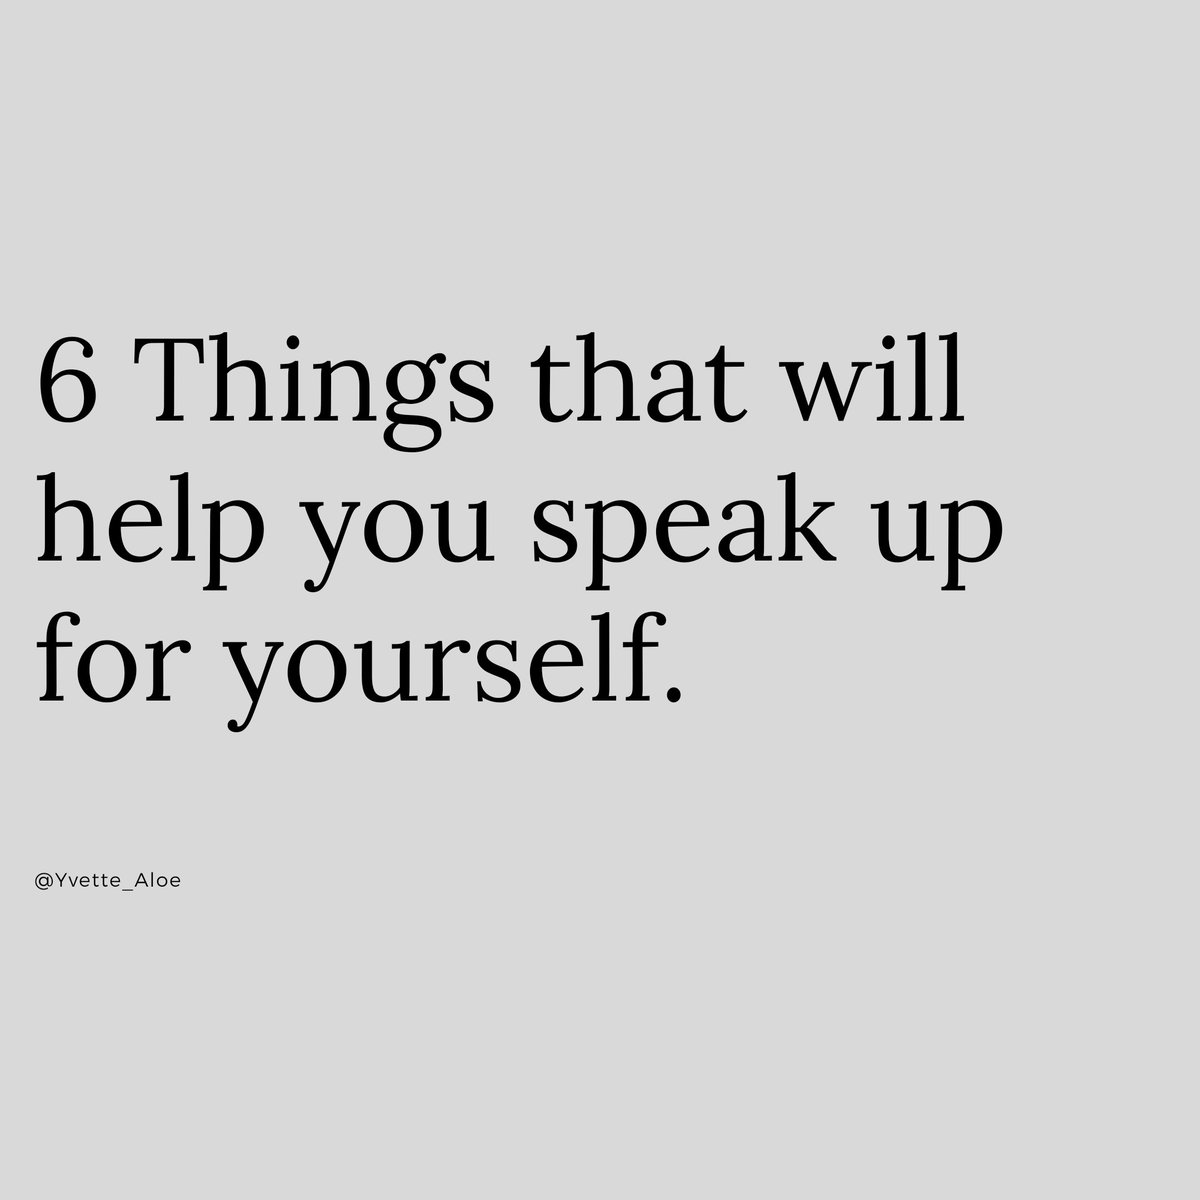 Here's a thread with 6 things that will help you speak up for yourself.